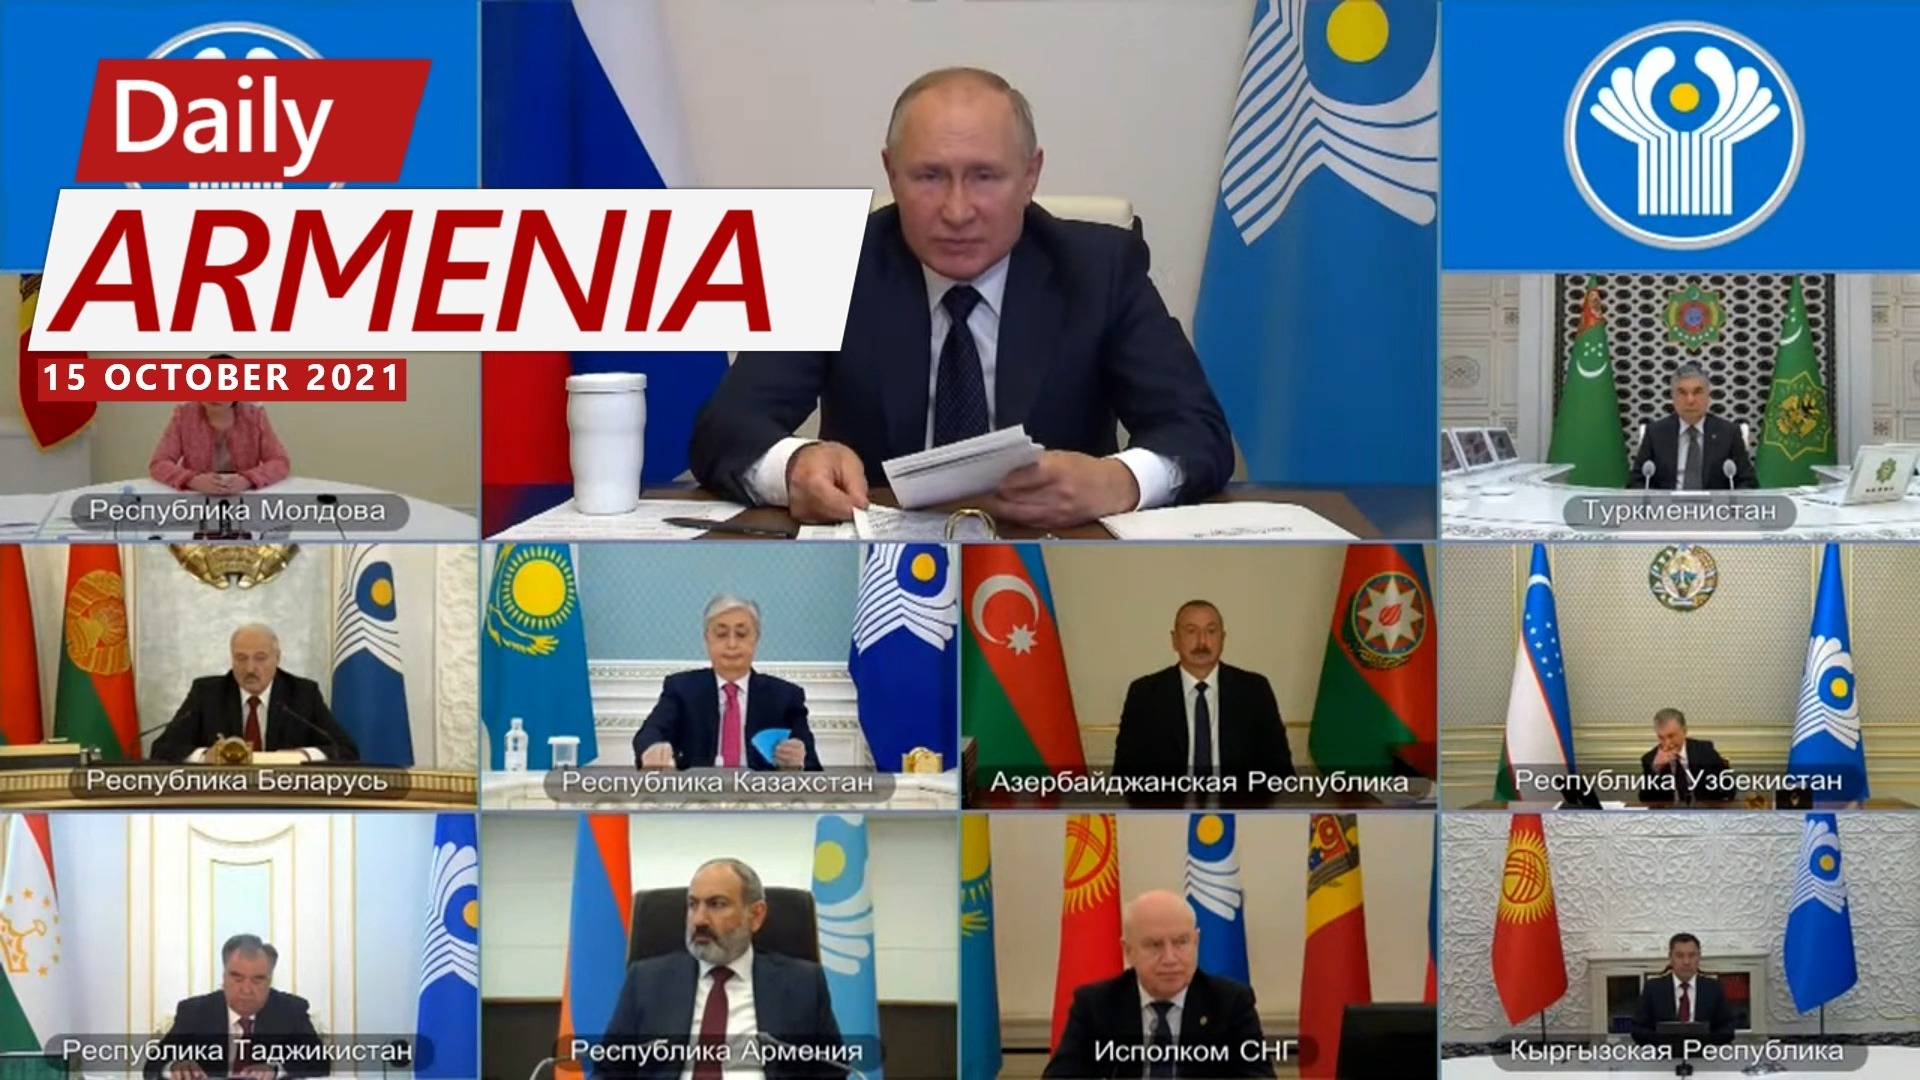 Putin refers to Artsakh as Armenia while discussing demining efforts in the region